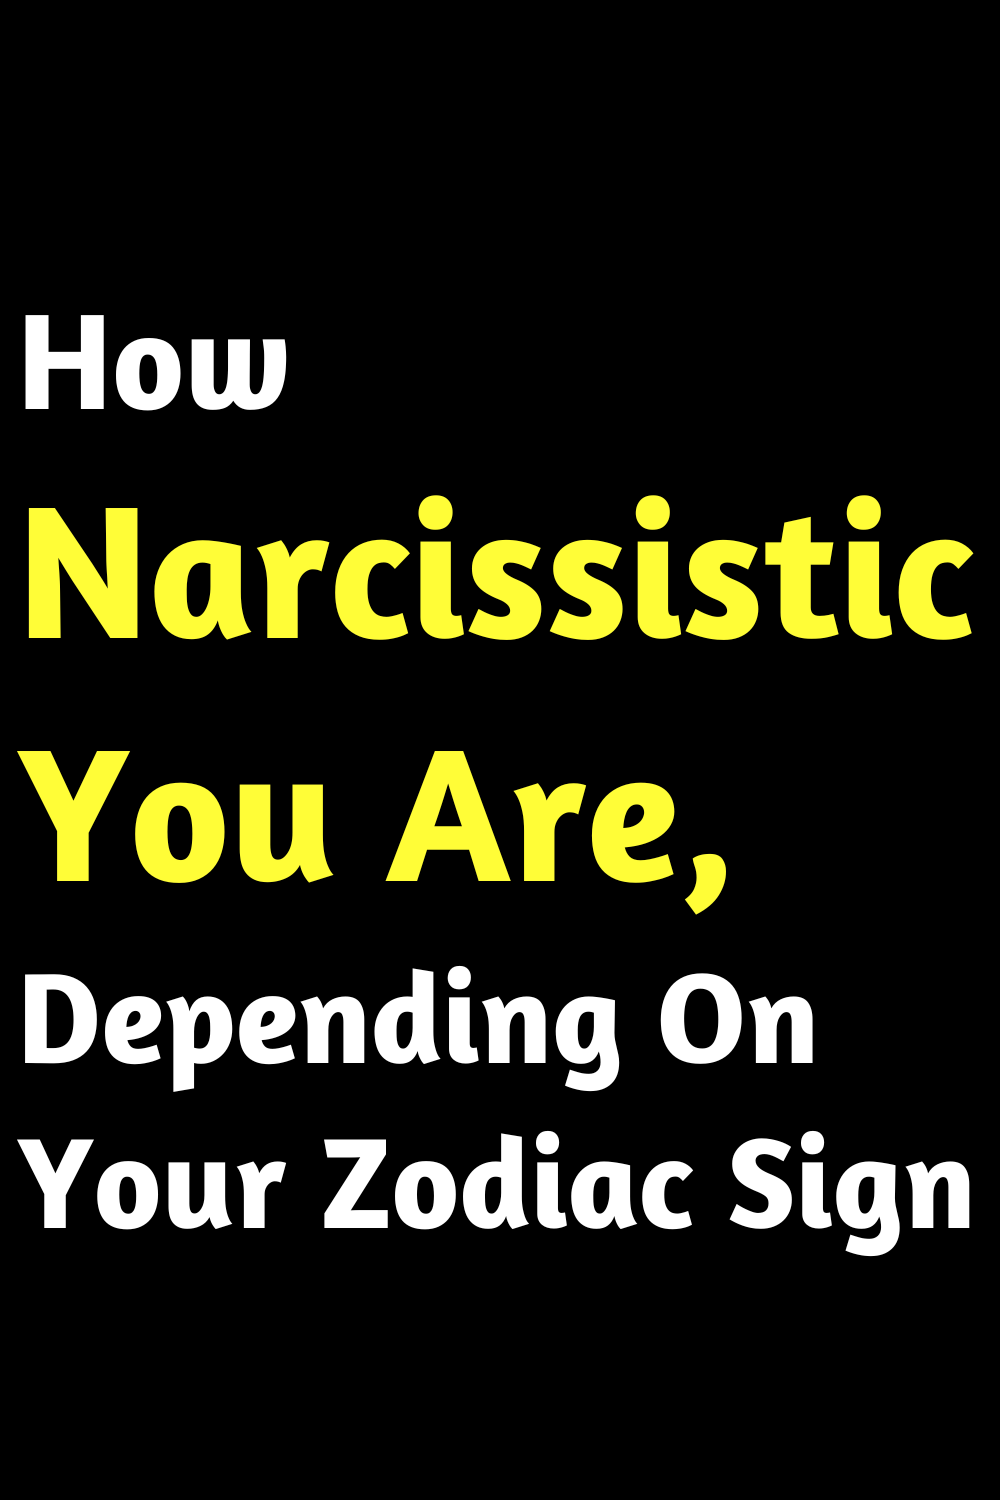 How Narcissistic You Are, Depending On Your Zodiac Sign